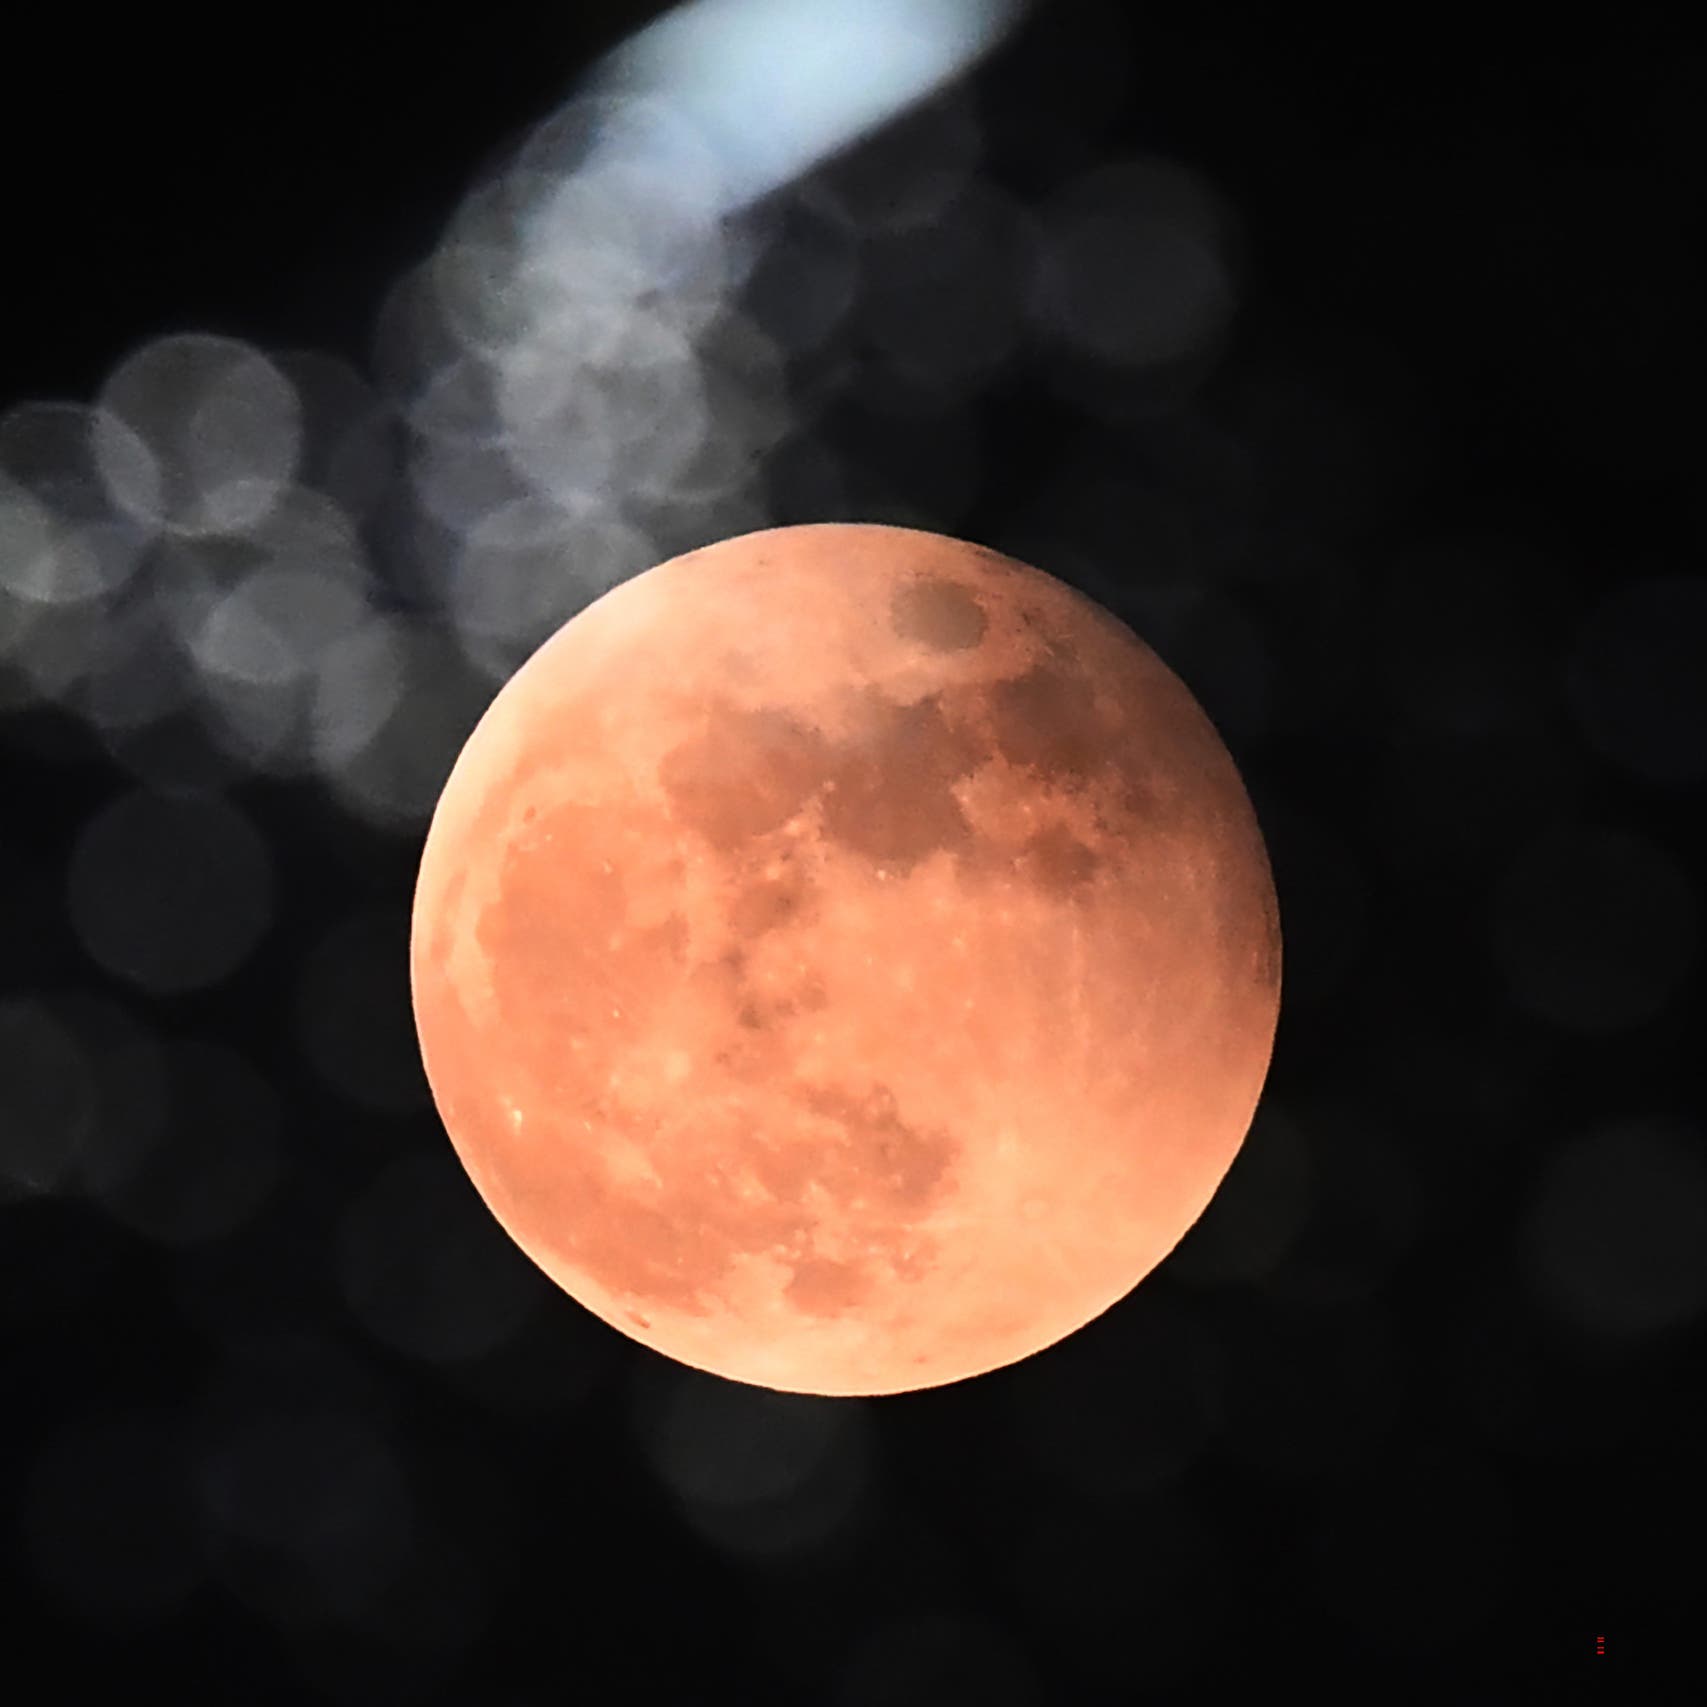 In pictures: Moon turns blood-red in last total lunar eclipse until 2025